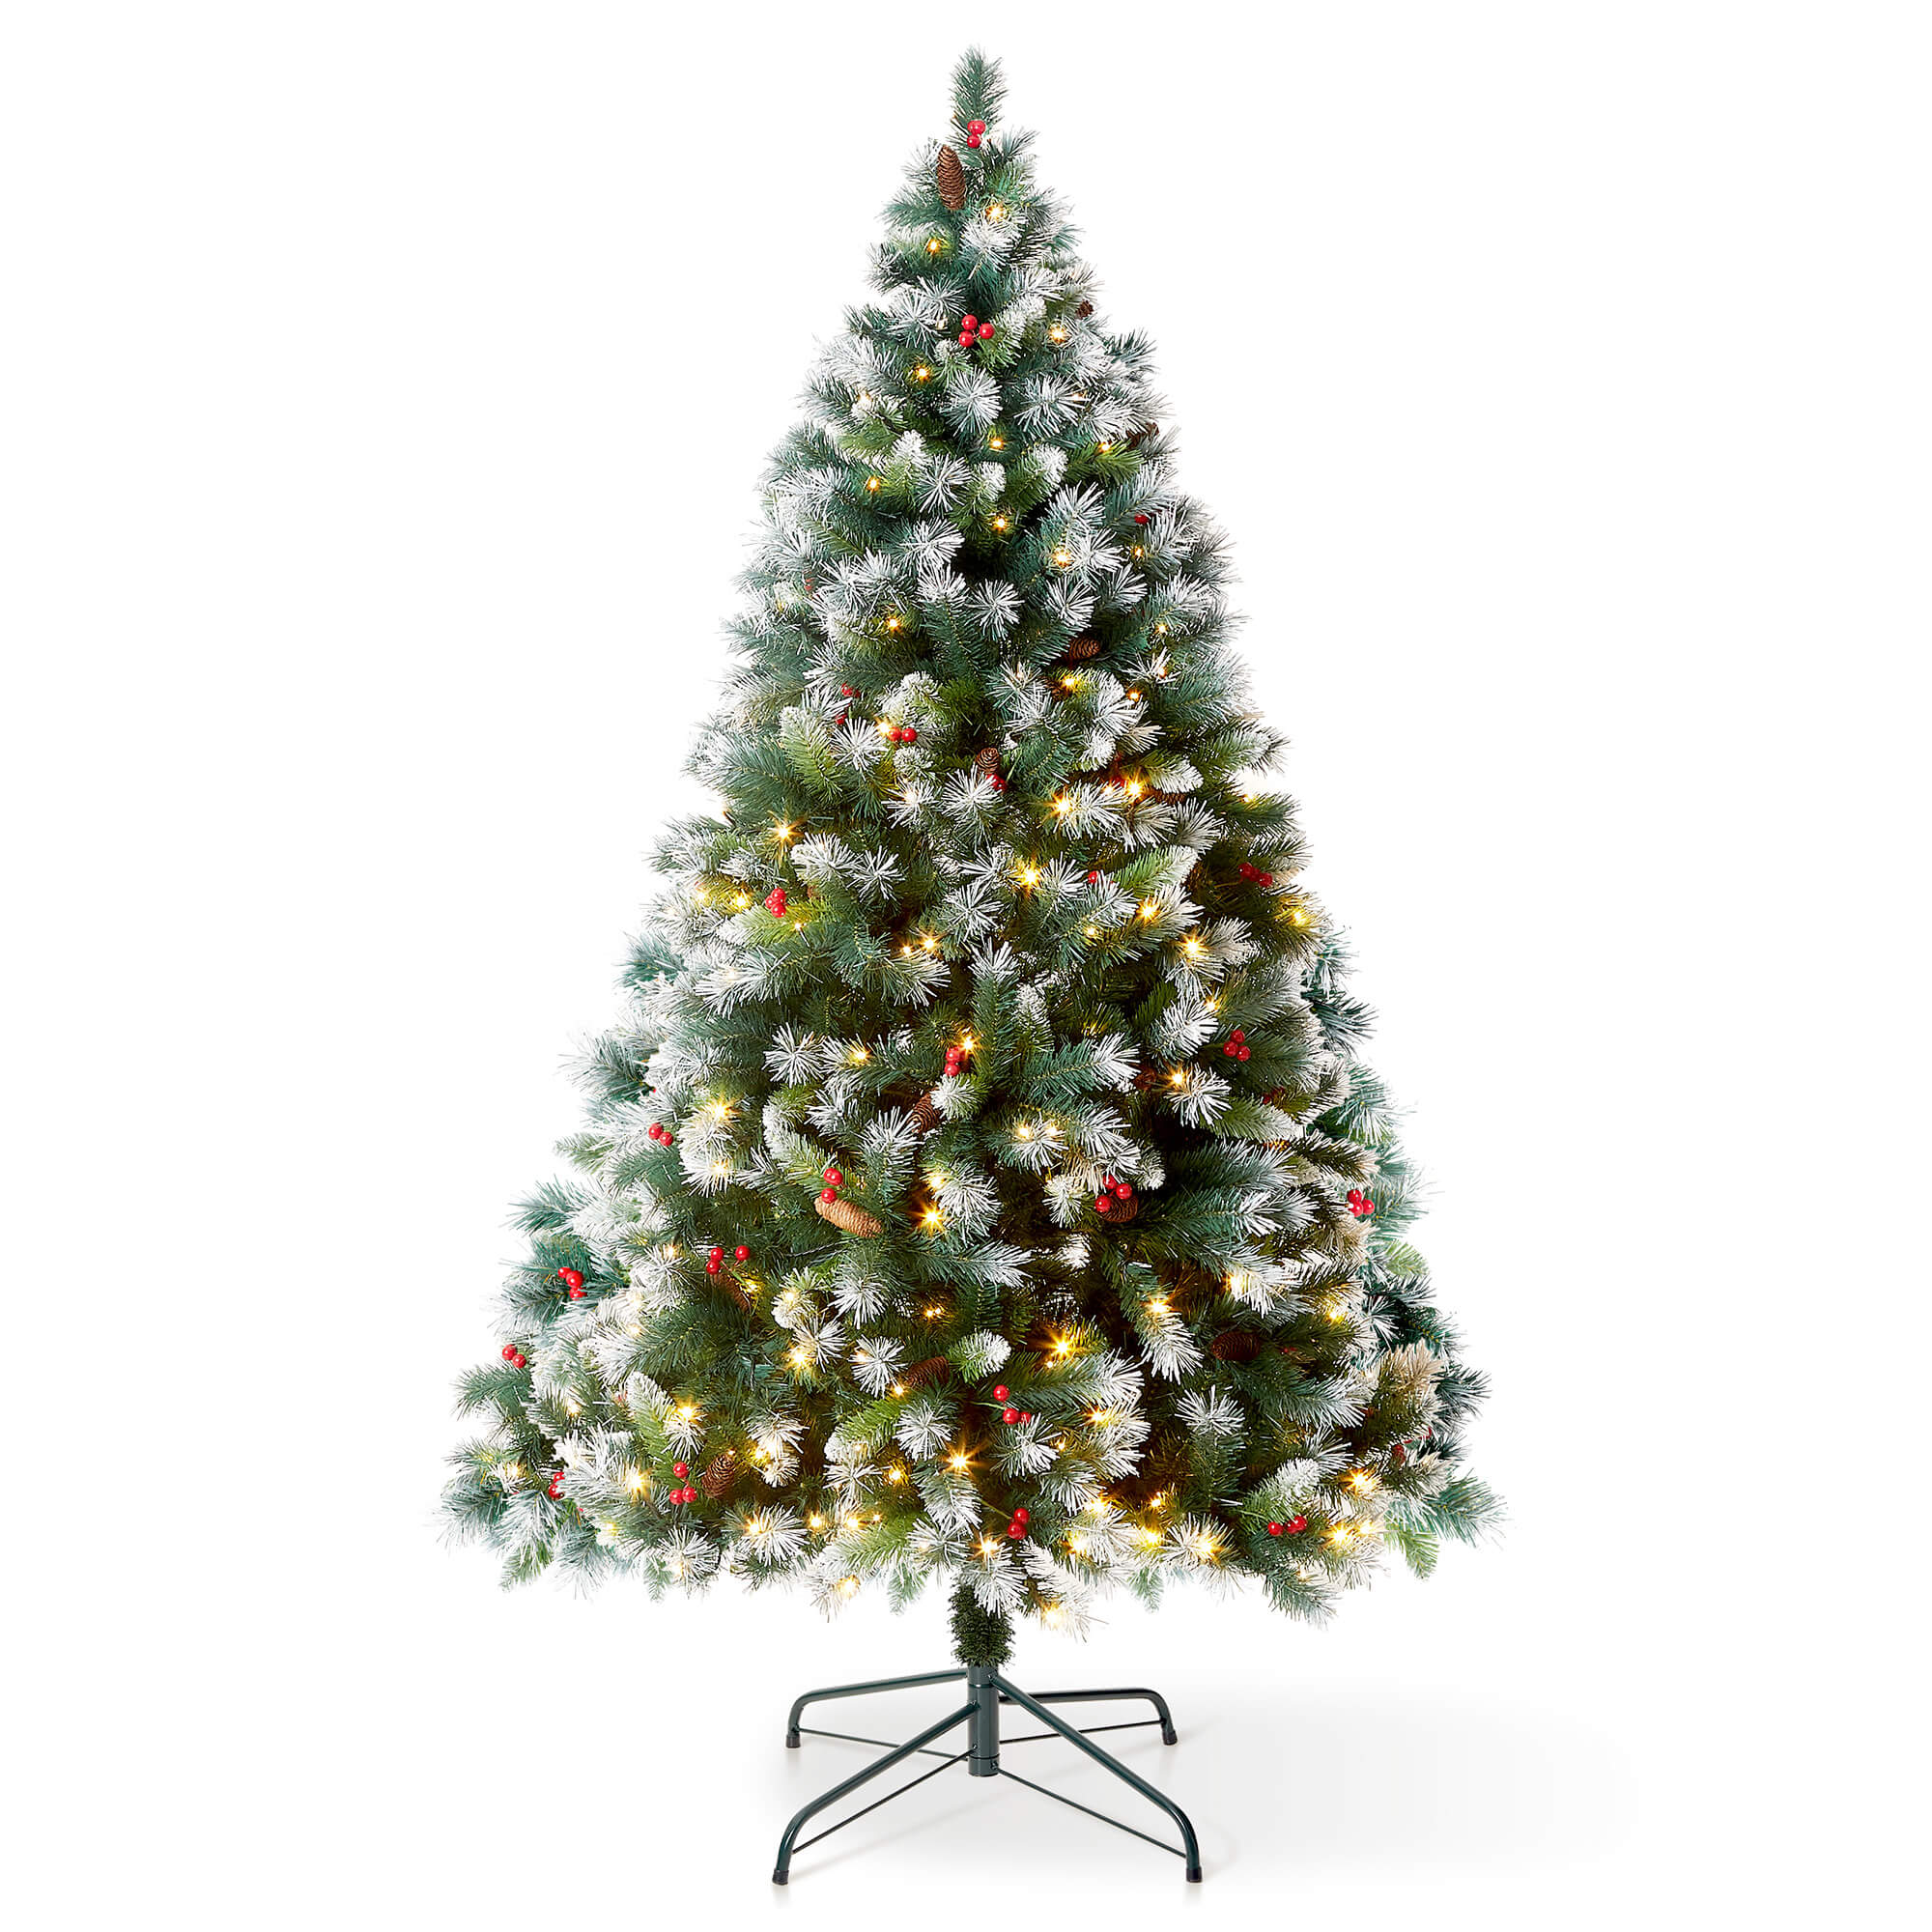 7FT Claudia Pre Lit Christmas Tree with 400LED Lights with Timer, 8 Light Modes, Decorative Pinecones and Berries